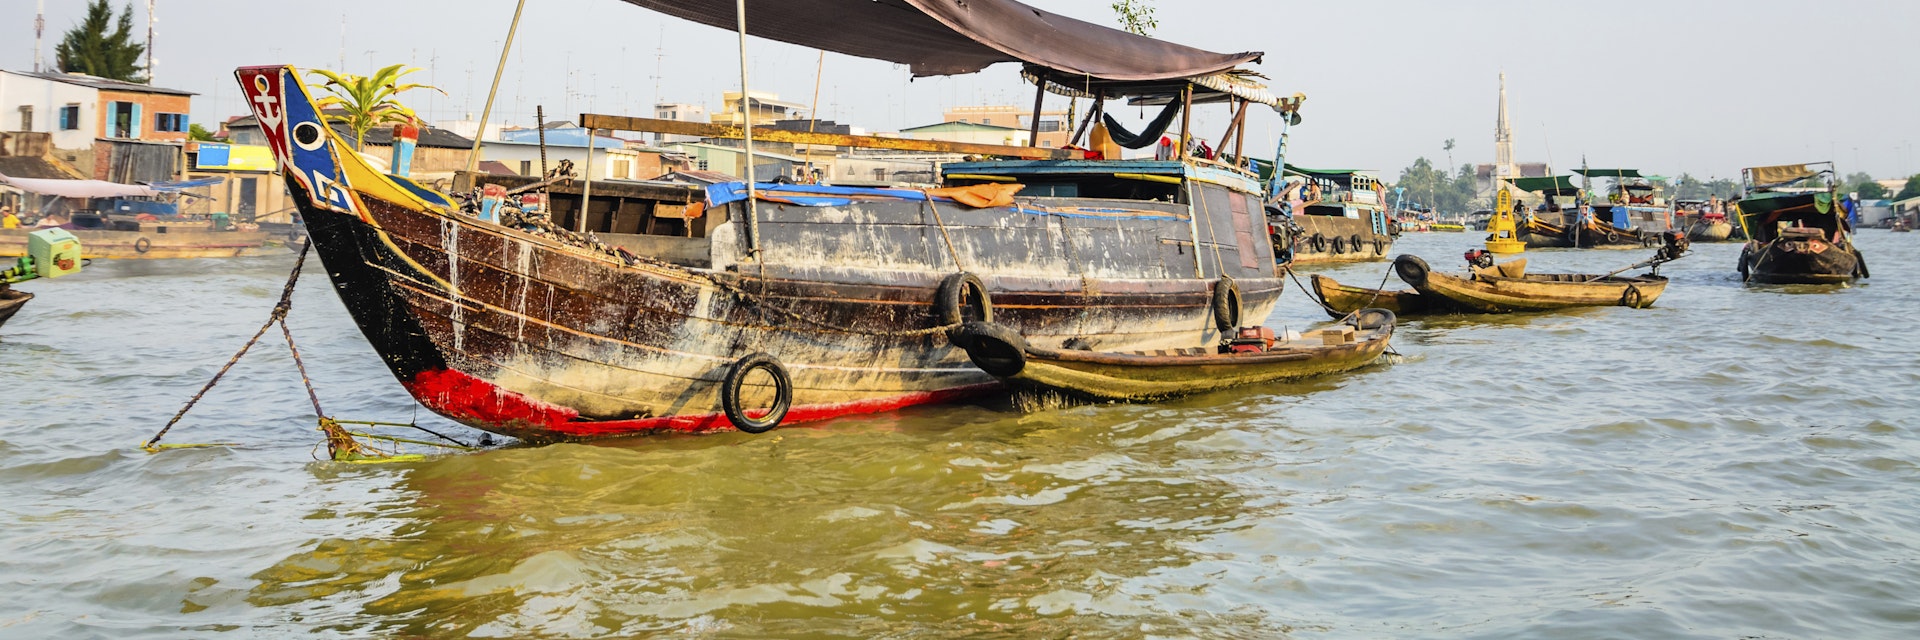 Trading boats on Cai Be Floating Market, Mekong Delta